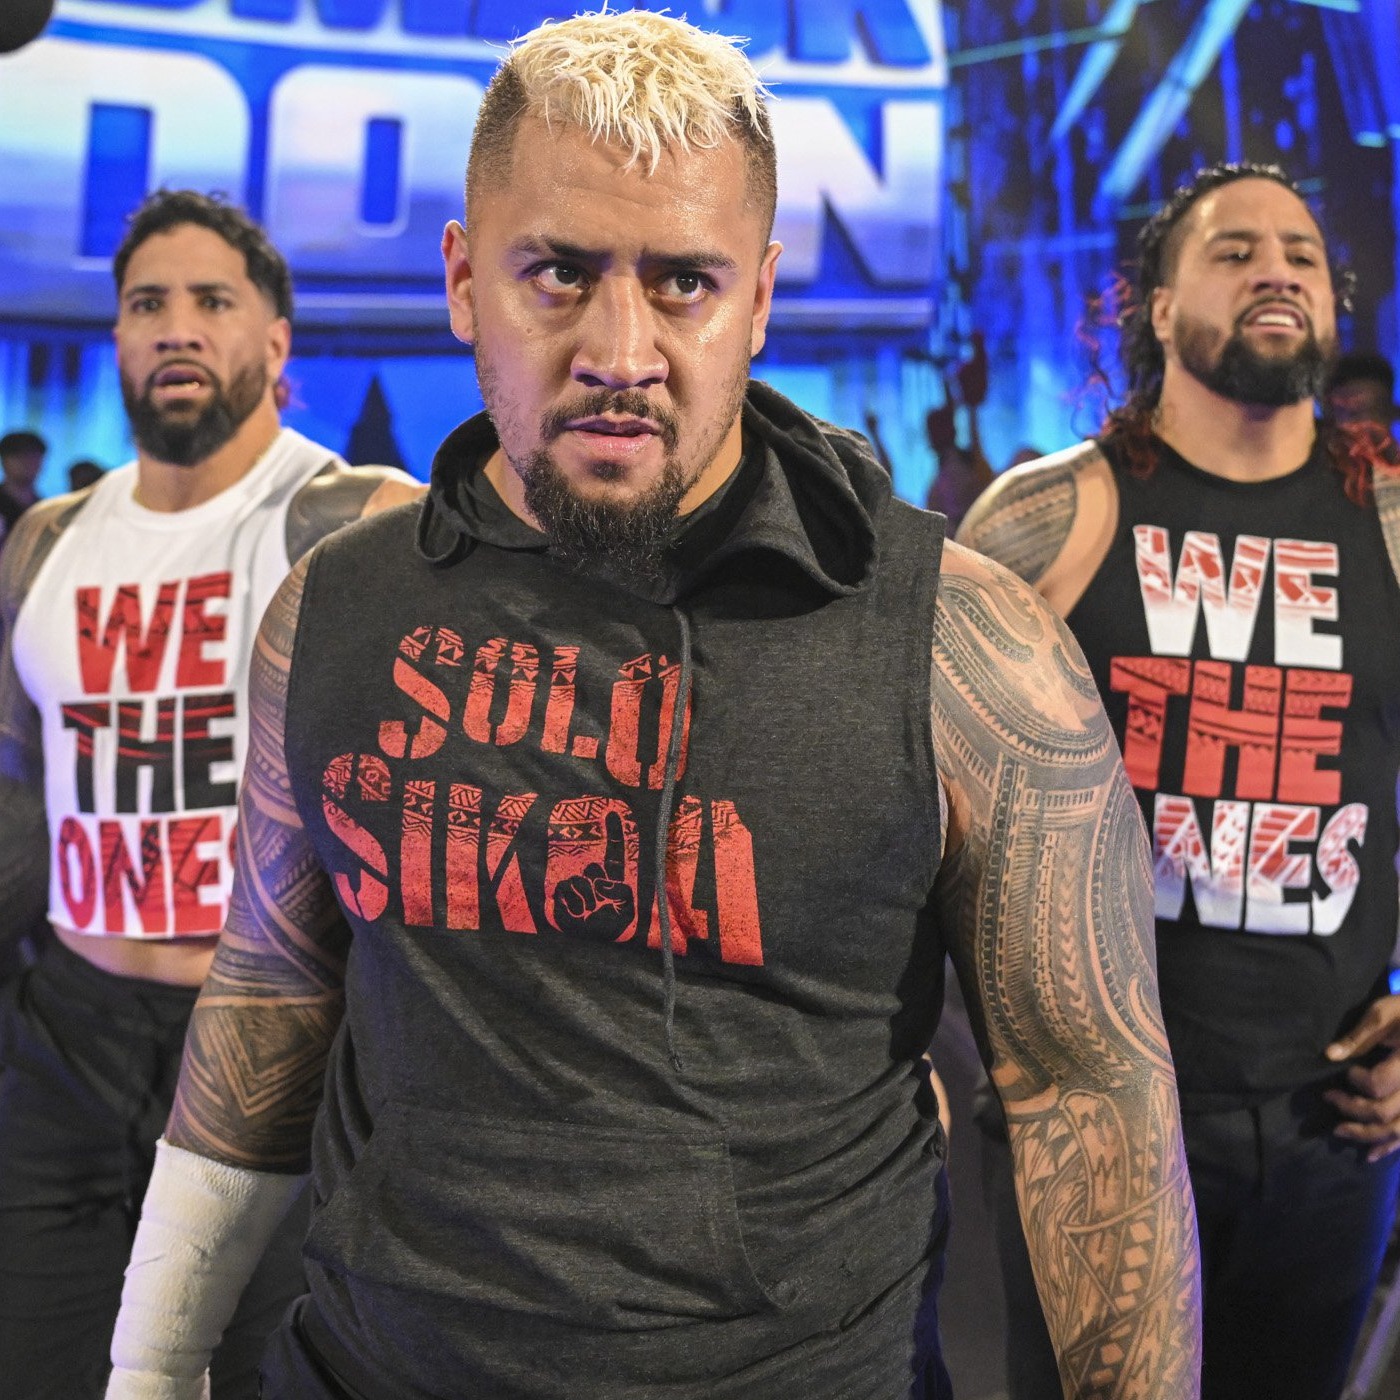 WINC Podcast (4/14): WWE SmackDown Review, More